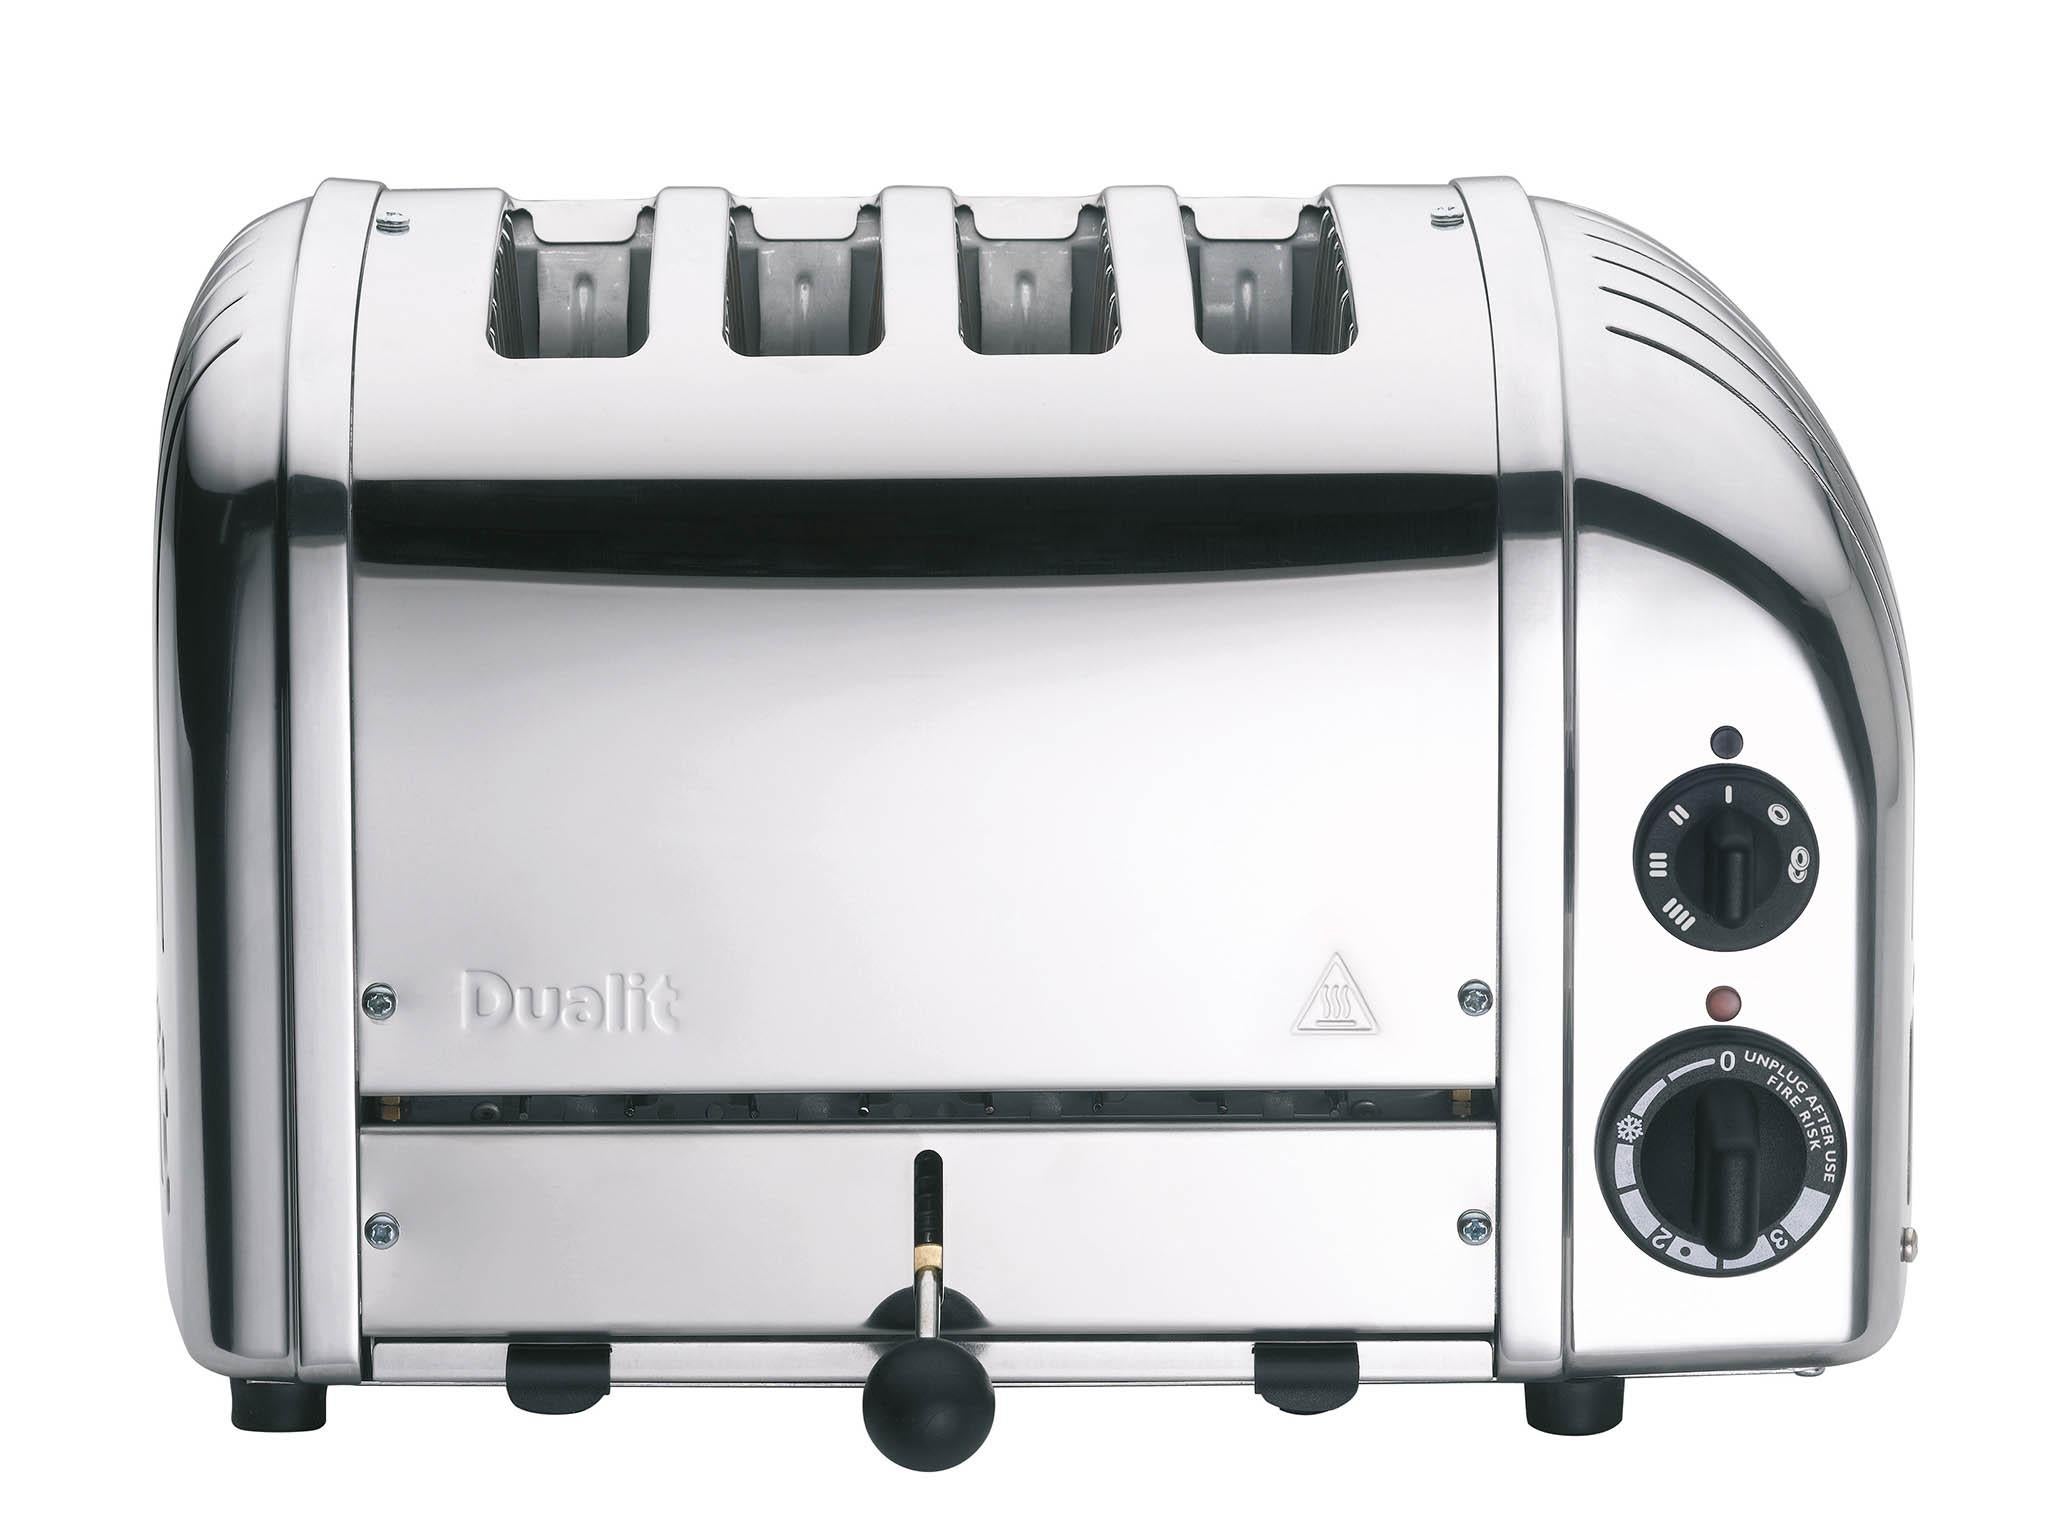 The four slot newgen toaster in polished, £195